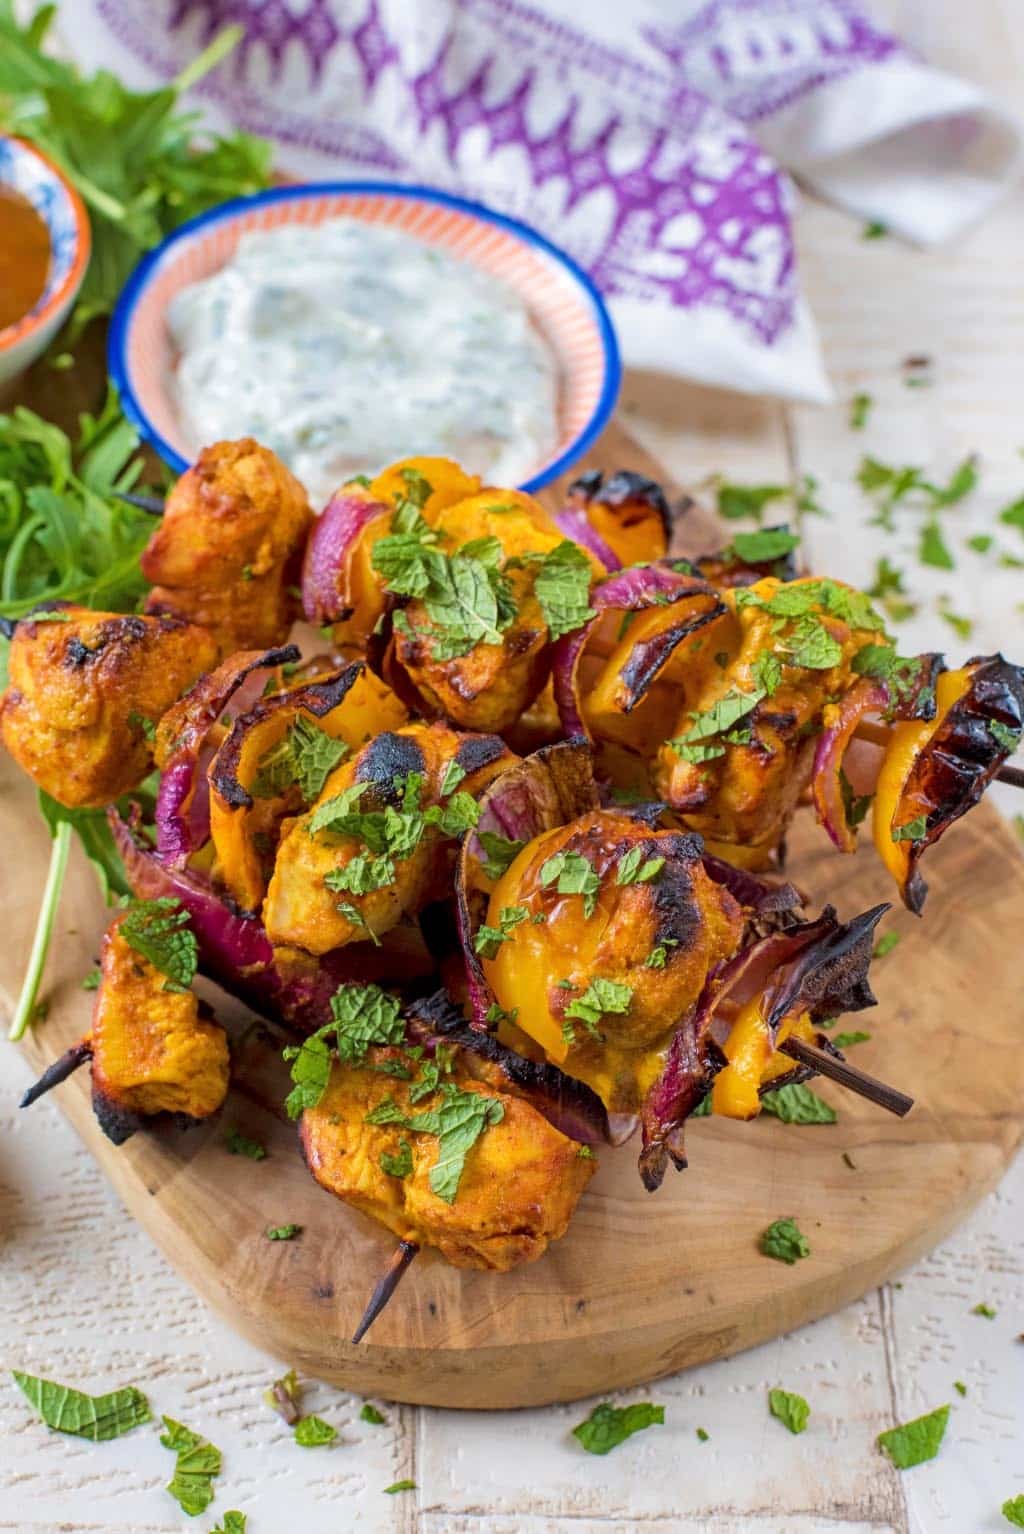 Four Chicken Tikka Kebabs on a wooden board in front of a white and purple towel.